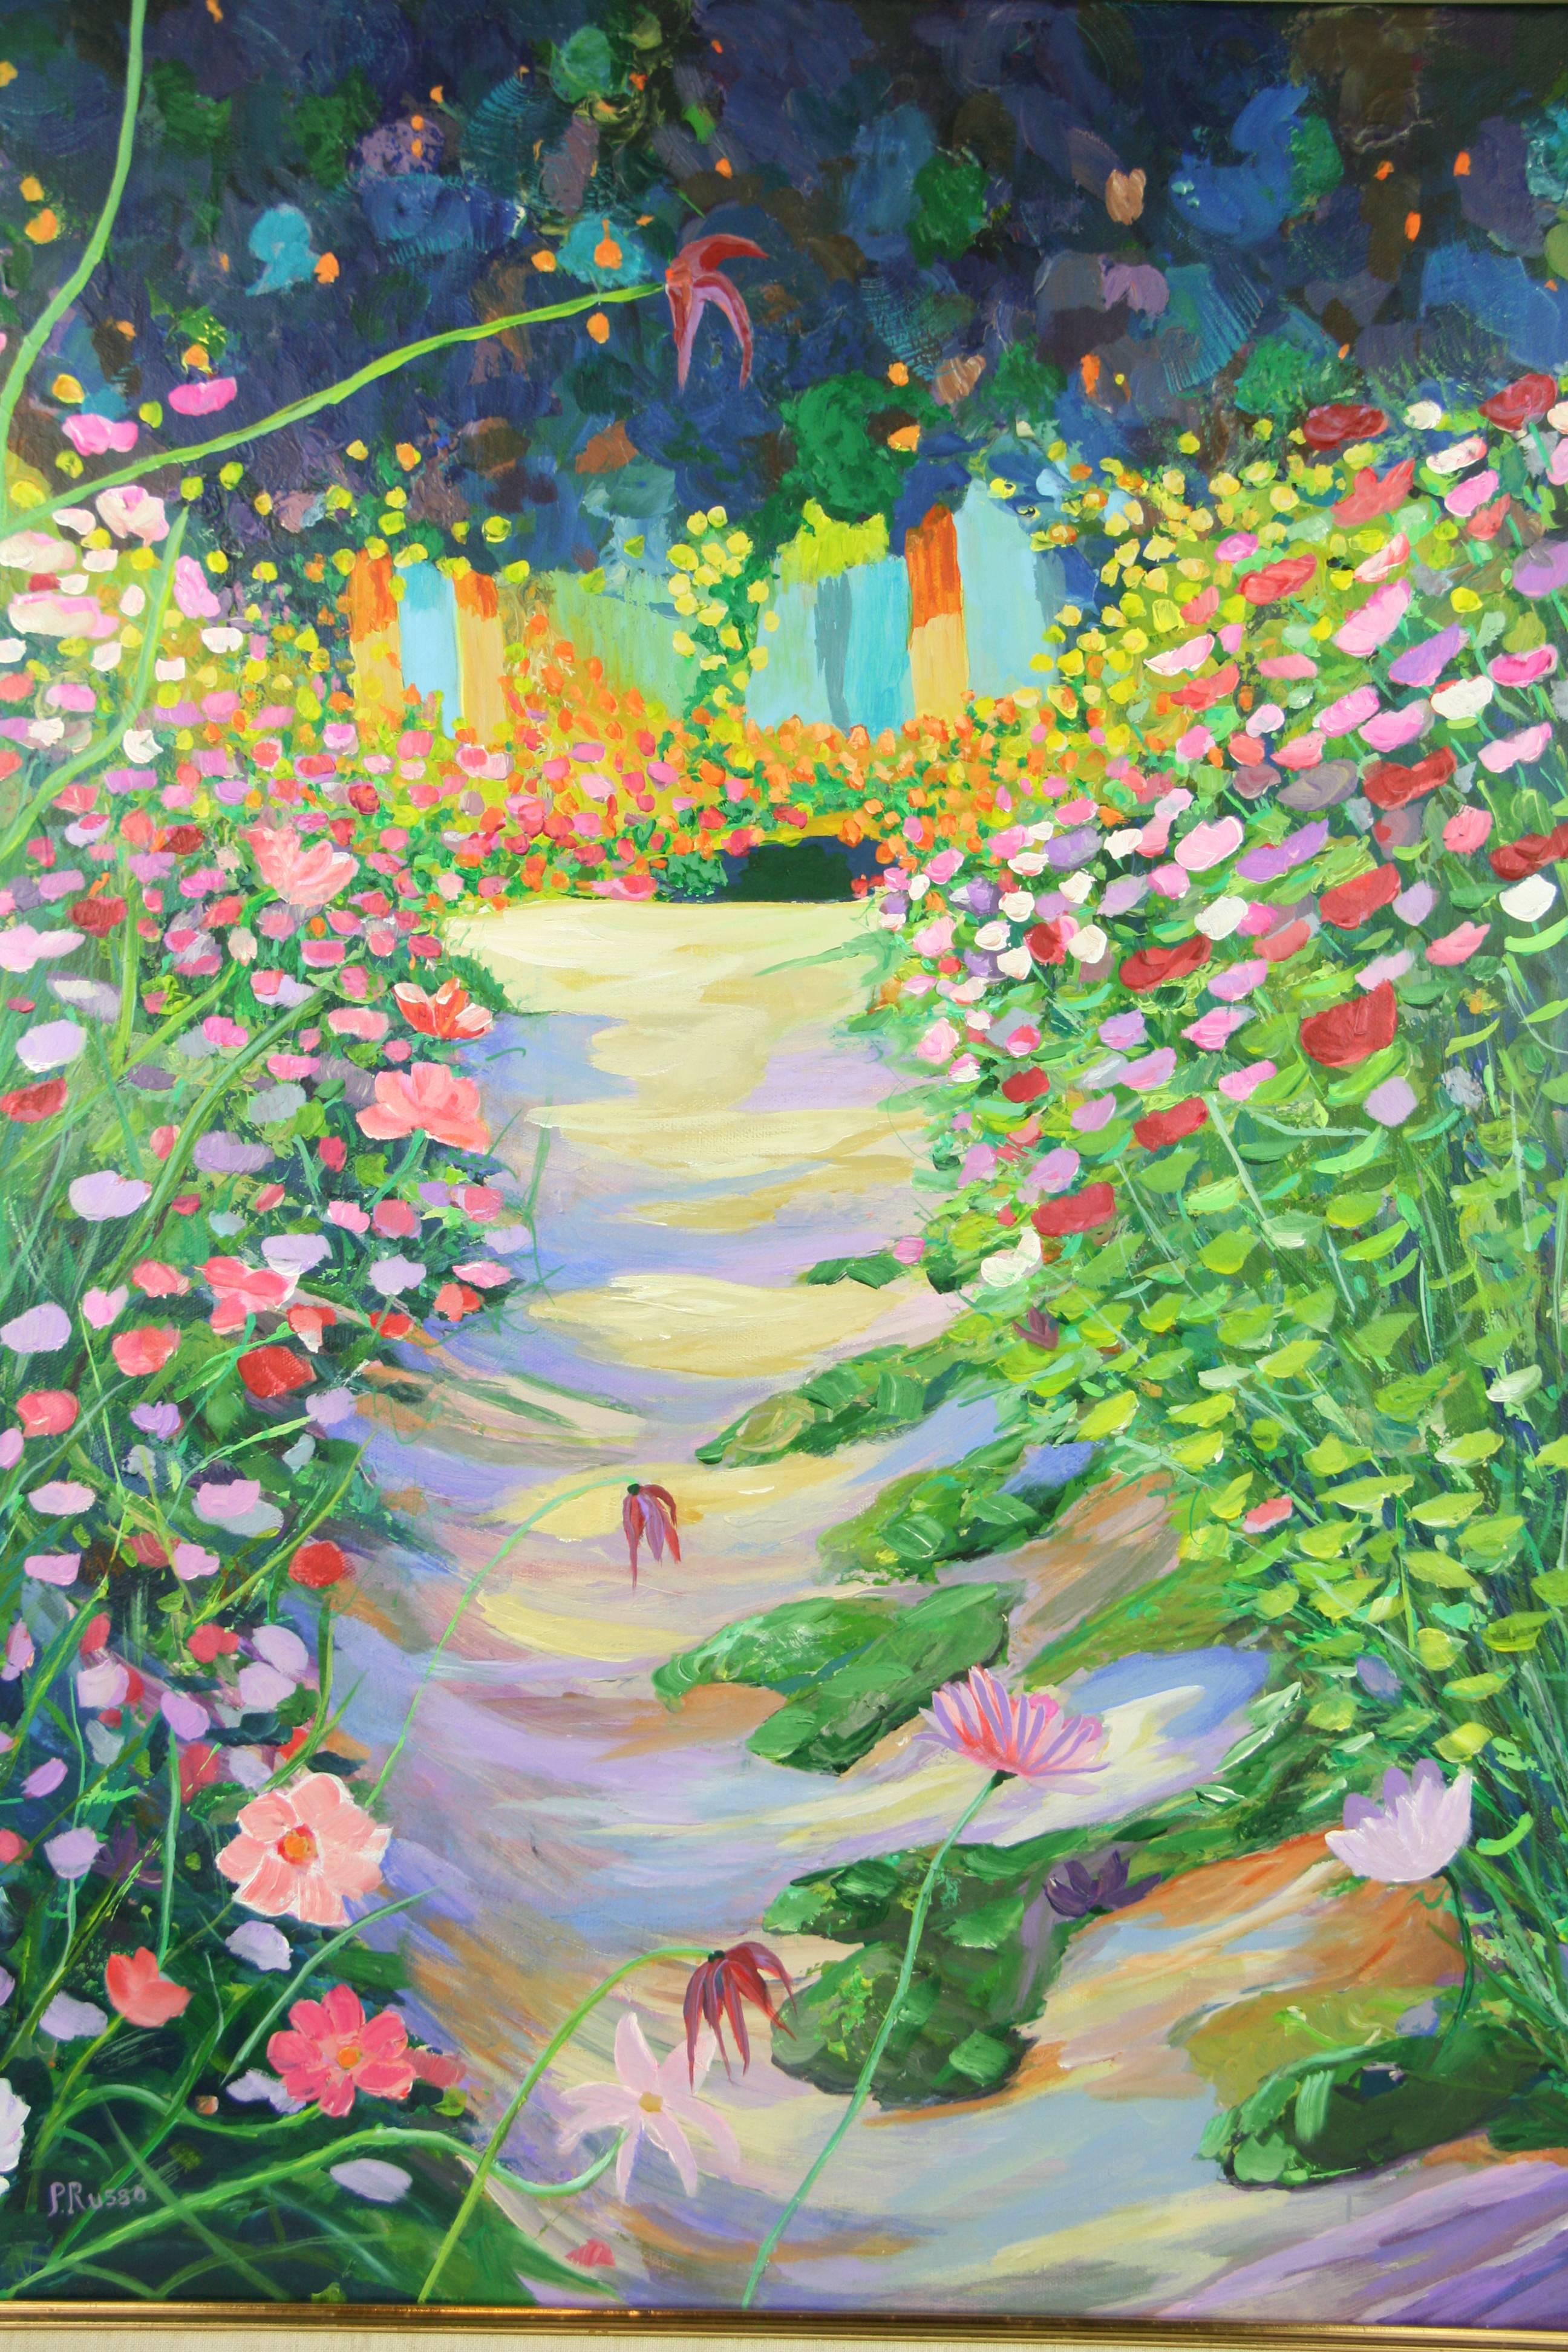 #5-2947 Garden Path,a contemporary acrylic on canvas displayed in a gilt wood frame.
Signed lower right by P.Russo Neapolitan artist
Image size 29.5 H X 23.5 W
